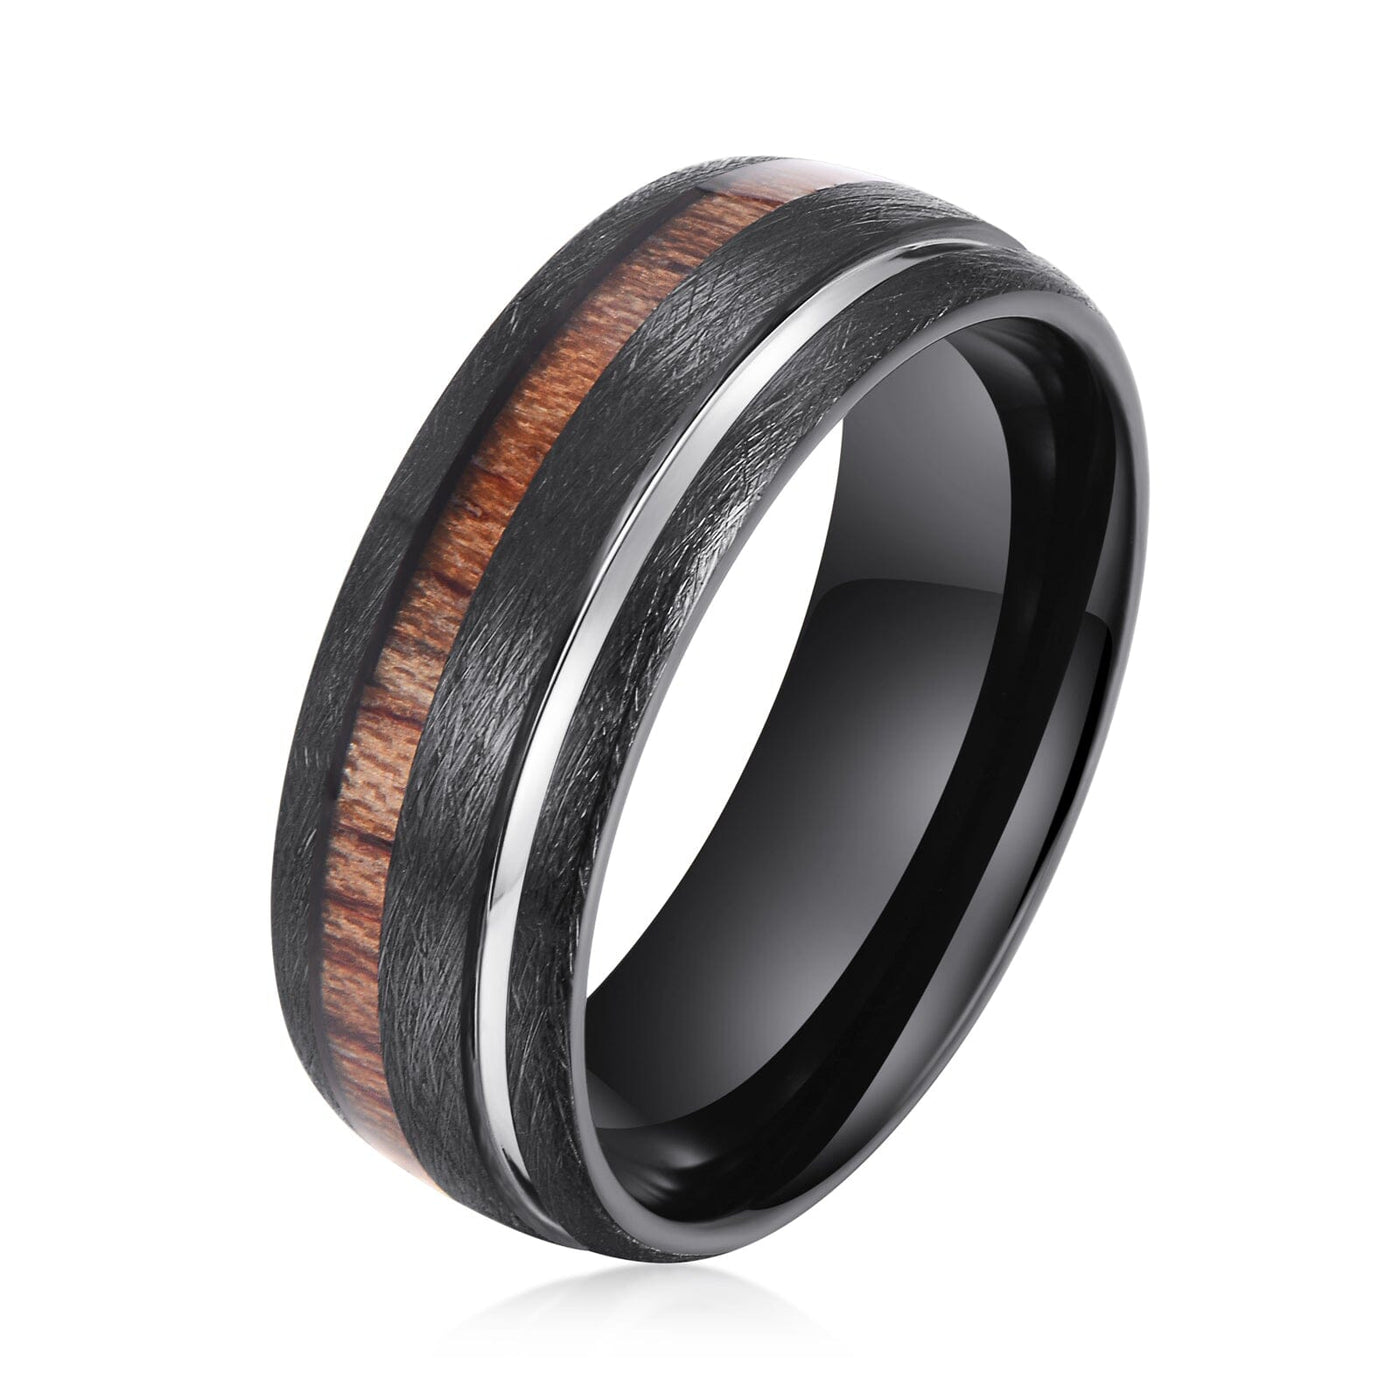 Men's Silver Groove & Wood Inlay Black Tungsten Ring RW015 Men's Ring Ouyuan Jewelry 